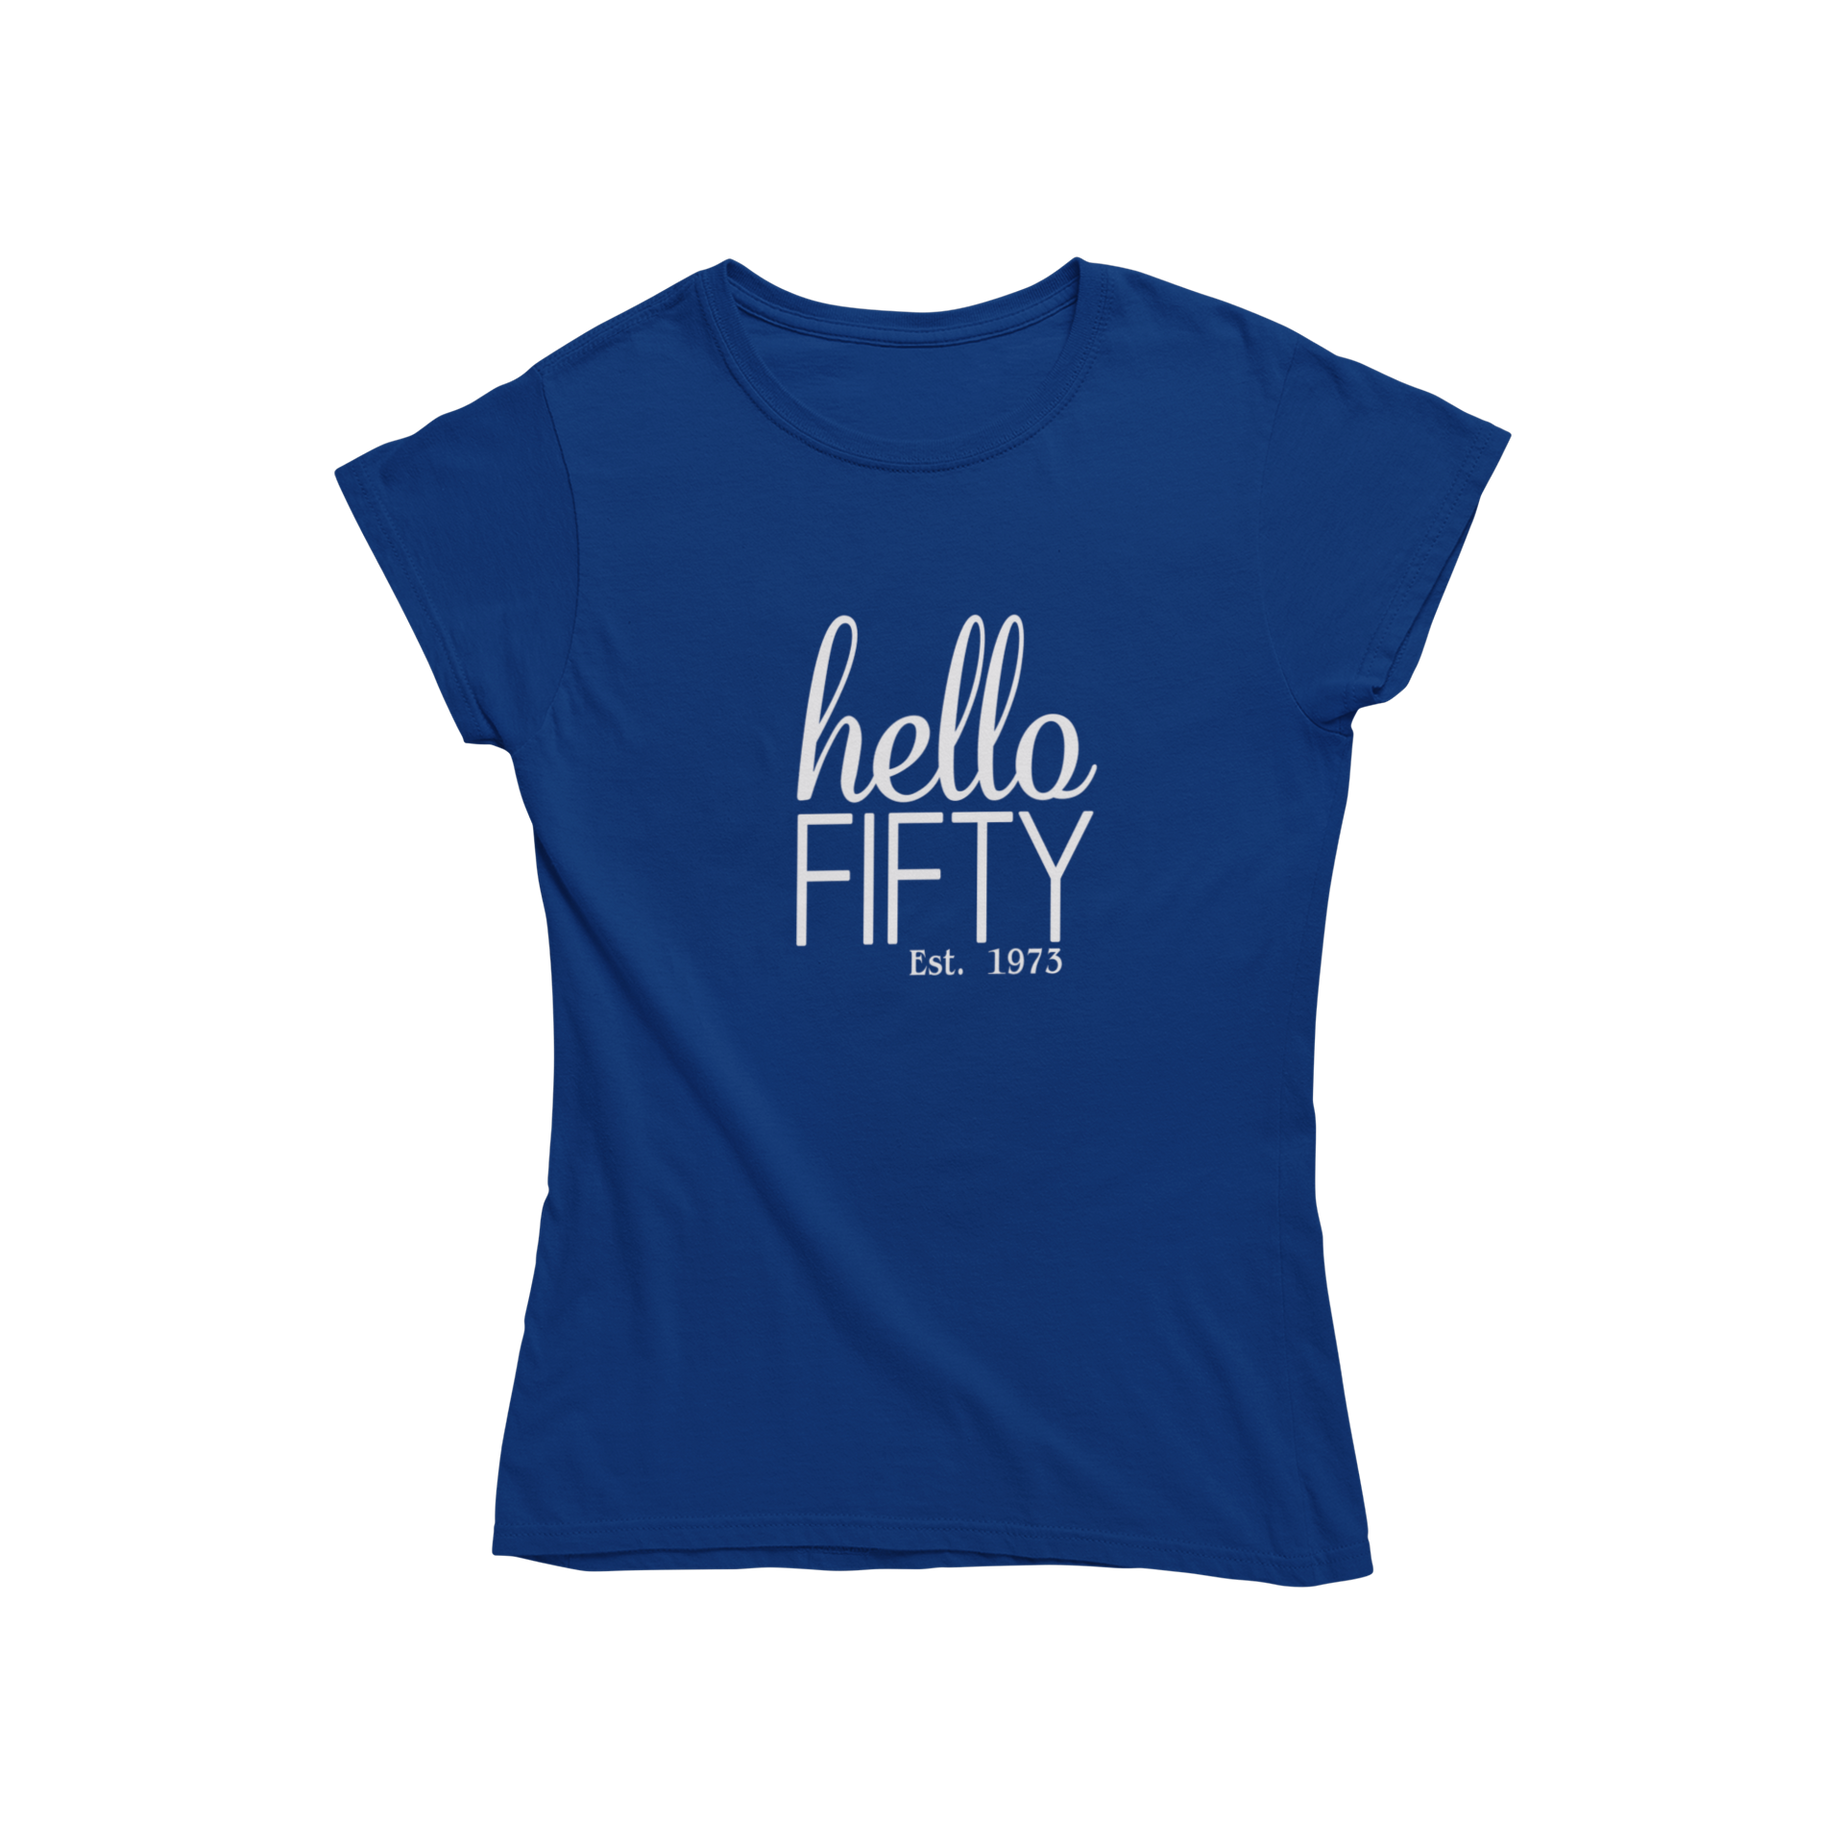 Teevolution has the perfect tee for your 50th birthday celebration! Our Hello 50 Women's Fitted T-Shirt is perfect for anyone born in 1973. Get your hands on one of these stylish and comfortable t-shirts and celebrate your milestone birthday in style!